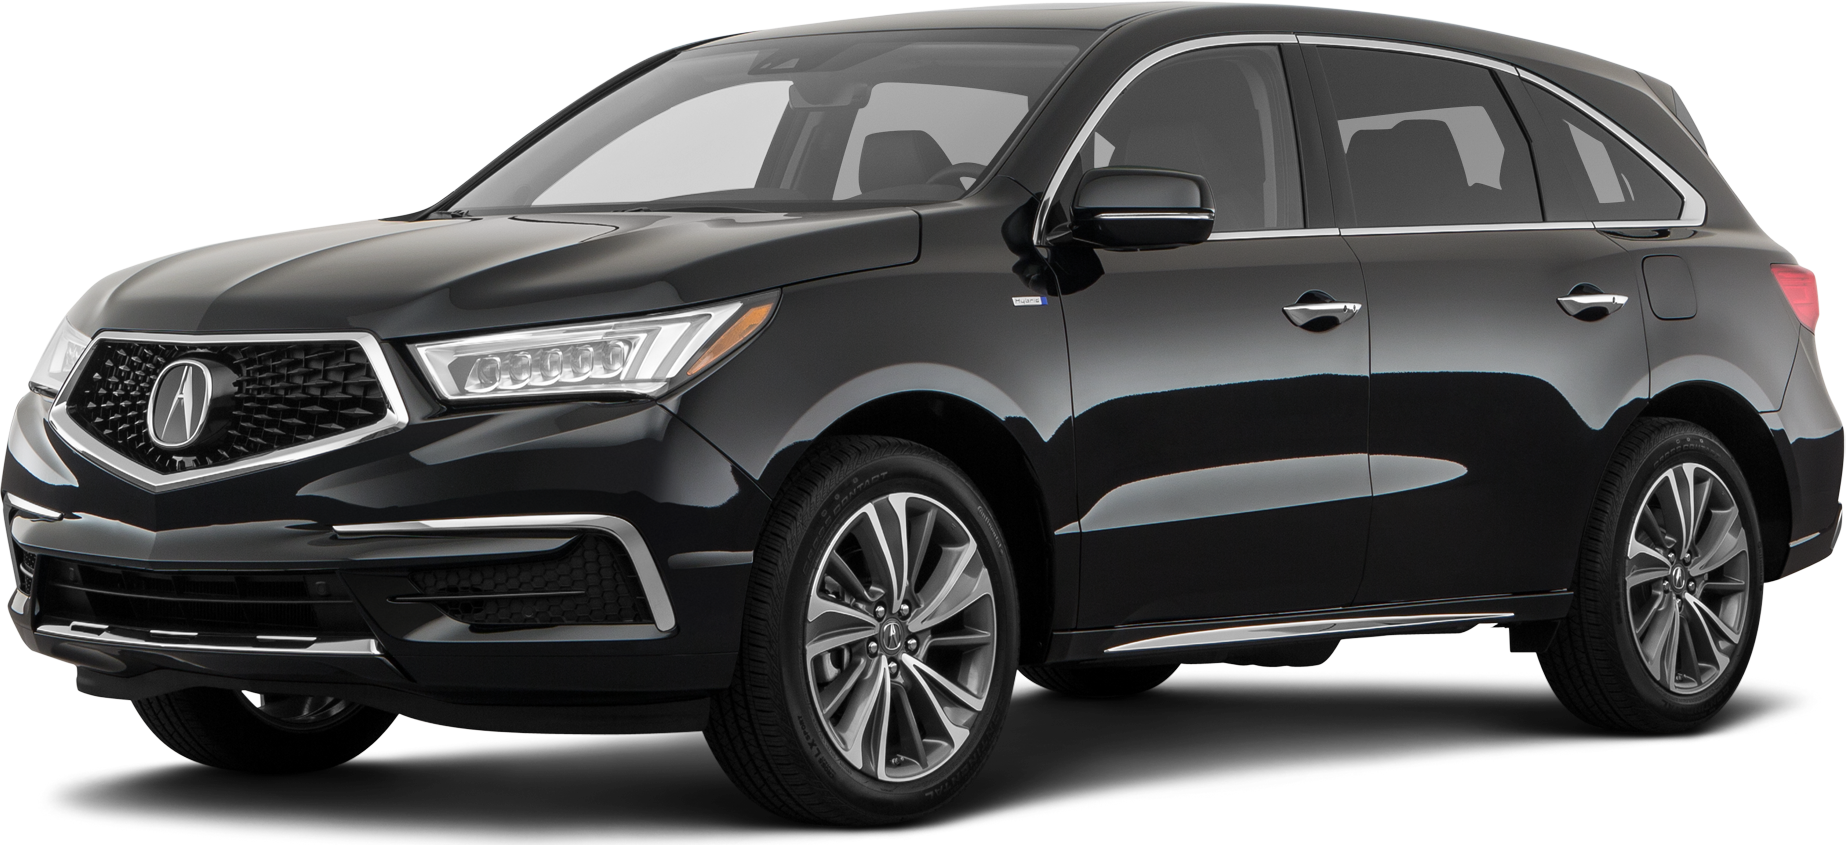 2018 Acura Mdx Sport Hybrid Price Value Ratings And Reviews Kelley